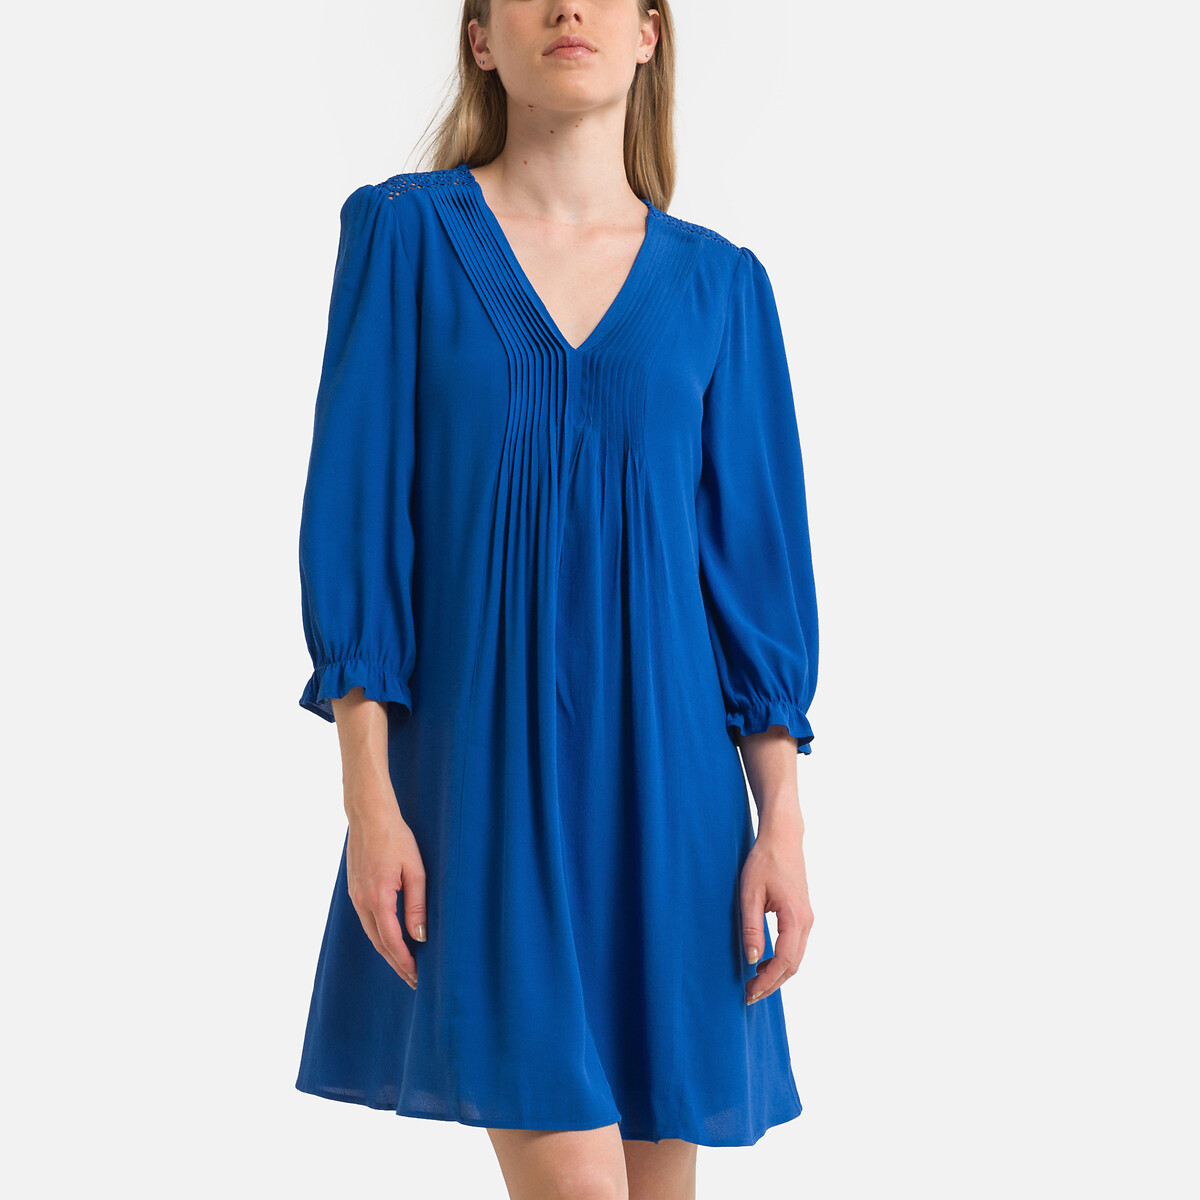 Pleated Mini Dress with V-Neck and 3/4 Length Sleeves